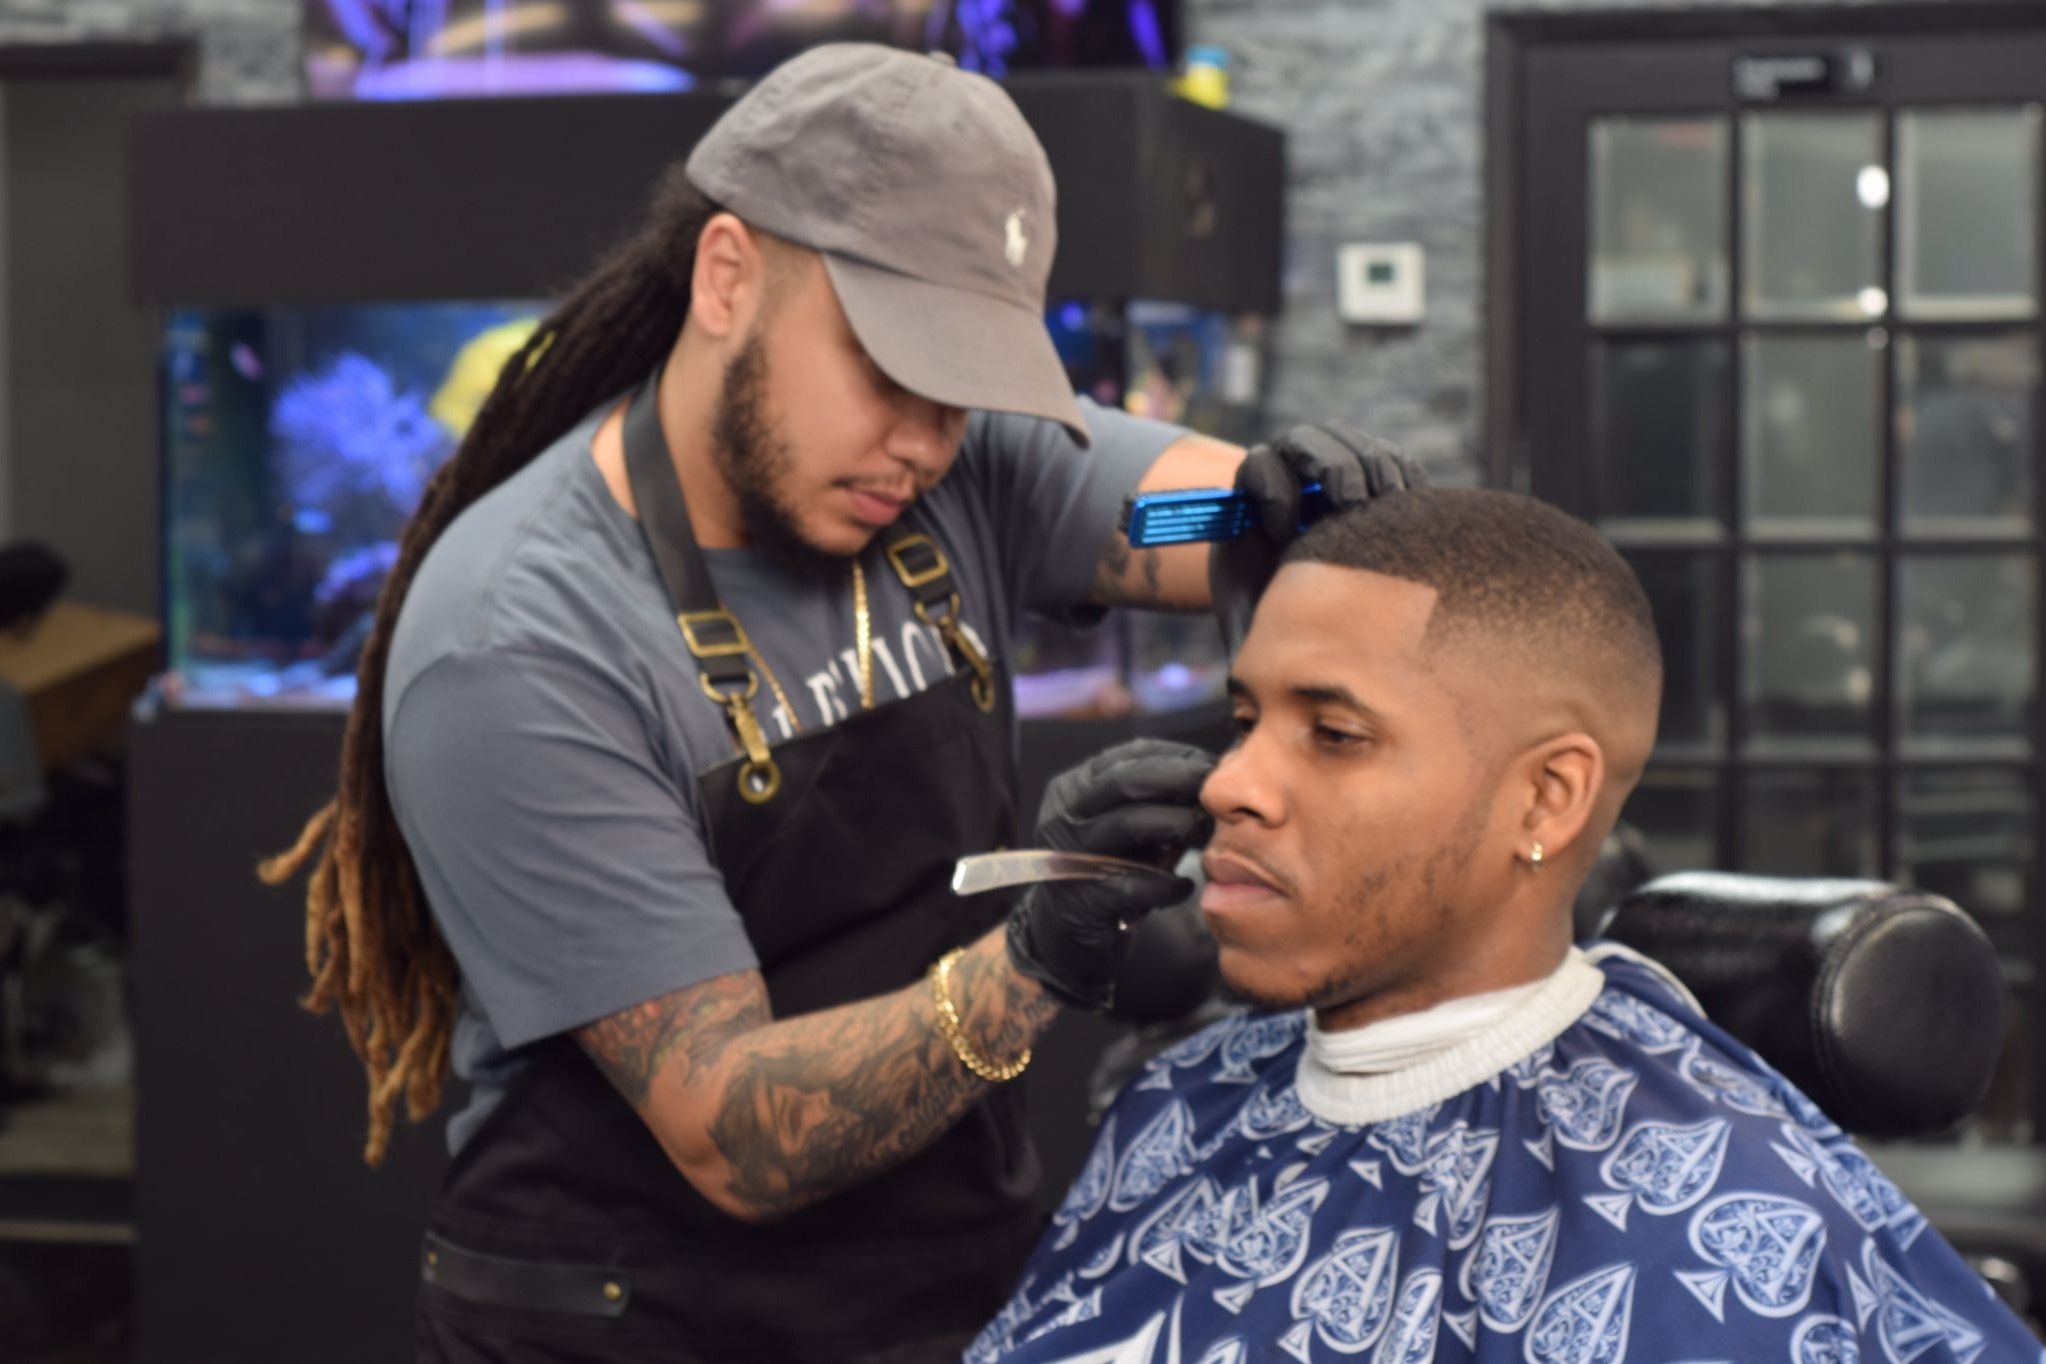 Clean Cuts Barber Shop - Lakeland - Book Online - Prices, Reviews, Photos